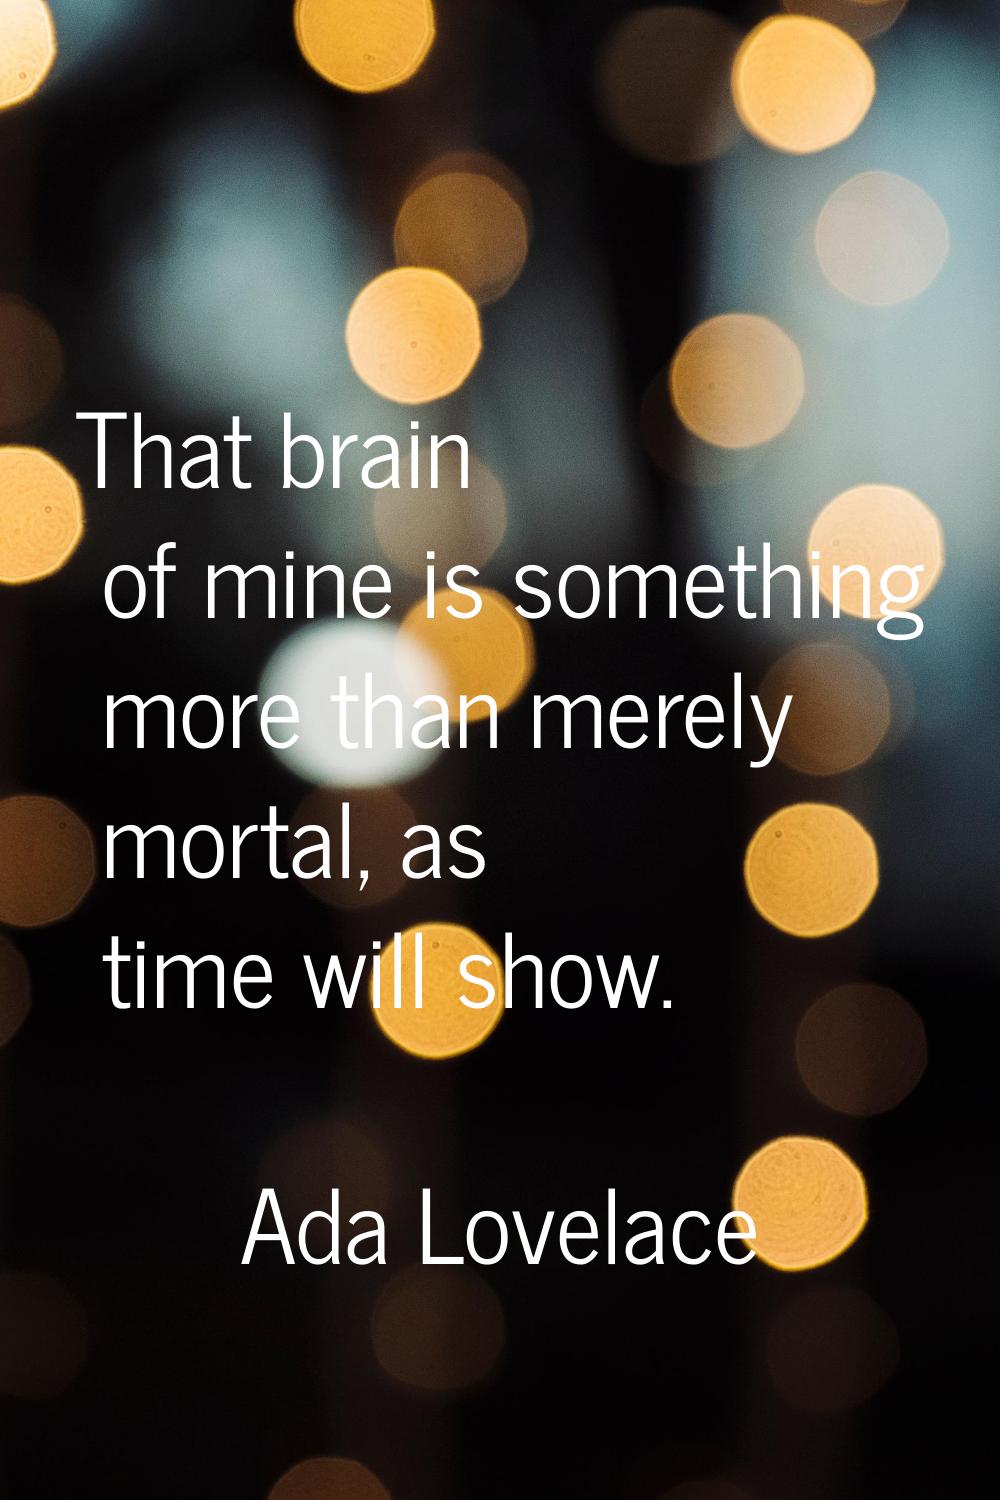 That brain of mine is something more than merely mortal, as time will show.